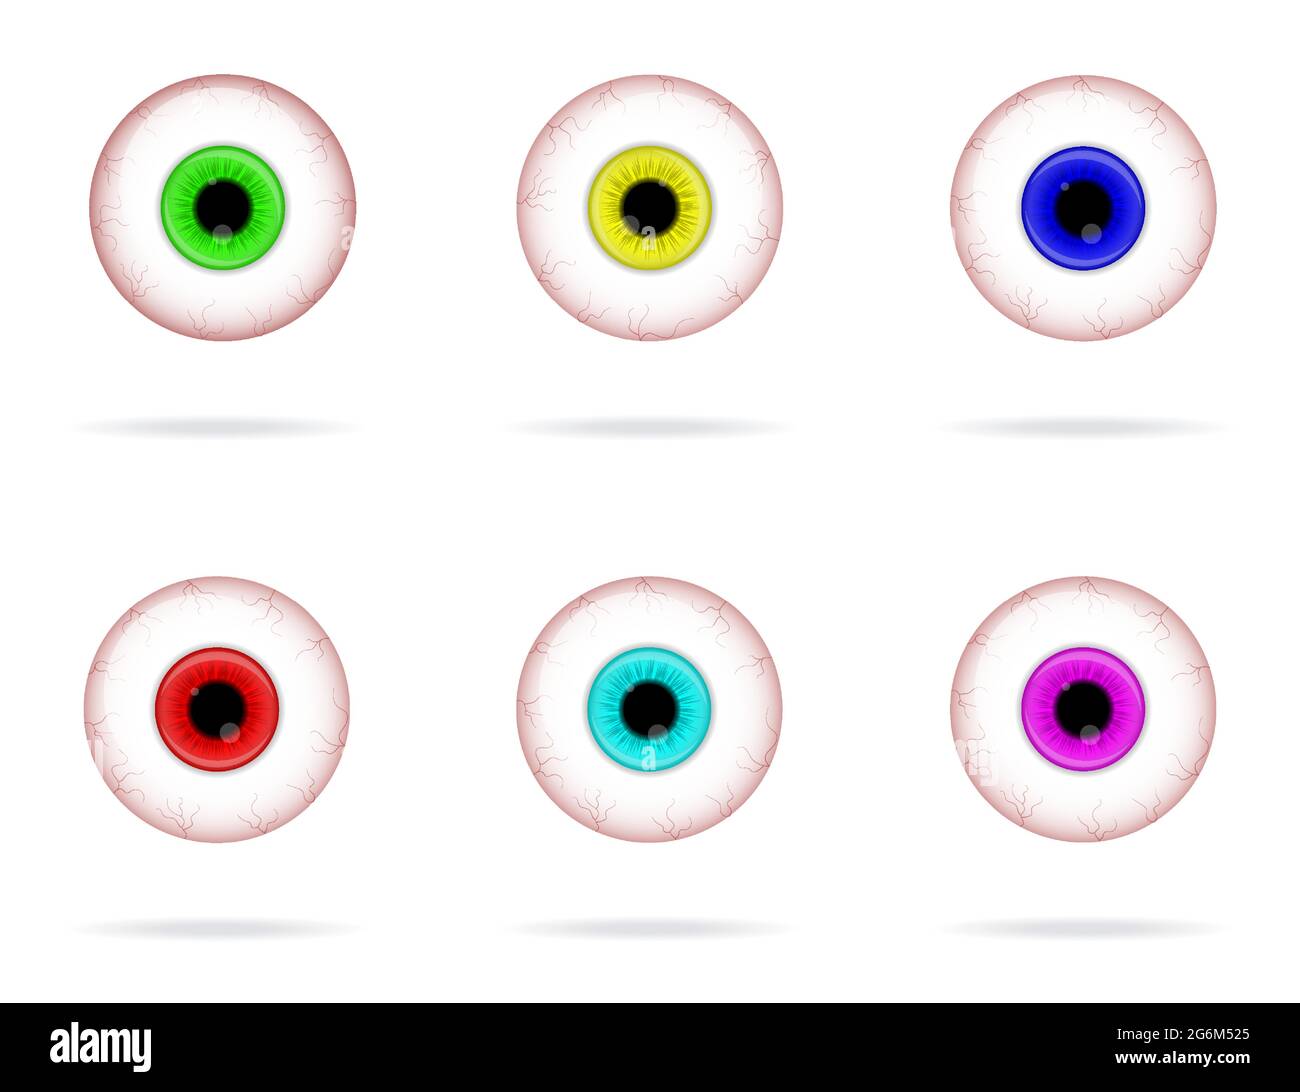 Set of spooky eyes vector illustration. Halloween scary eyeball collection isolated on white background. Decorations for horror parties. Detailed eyeb Stock Vector